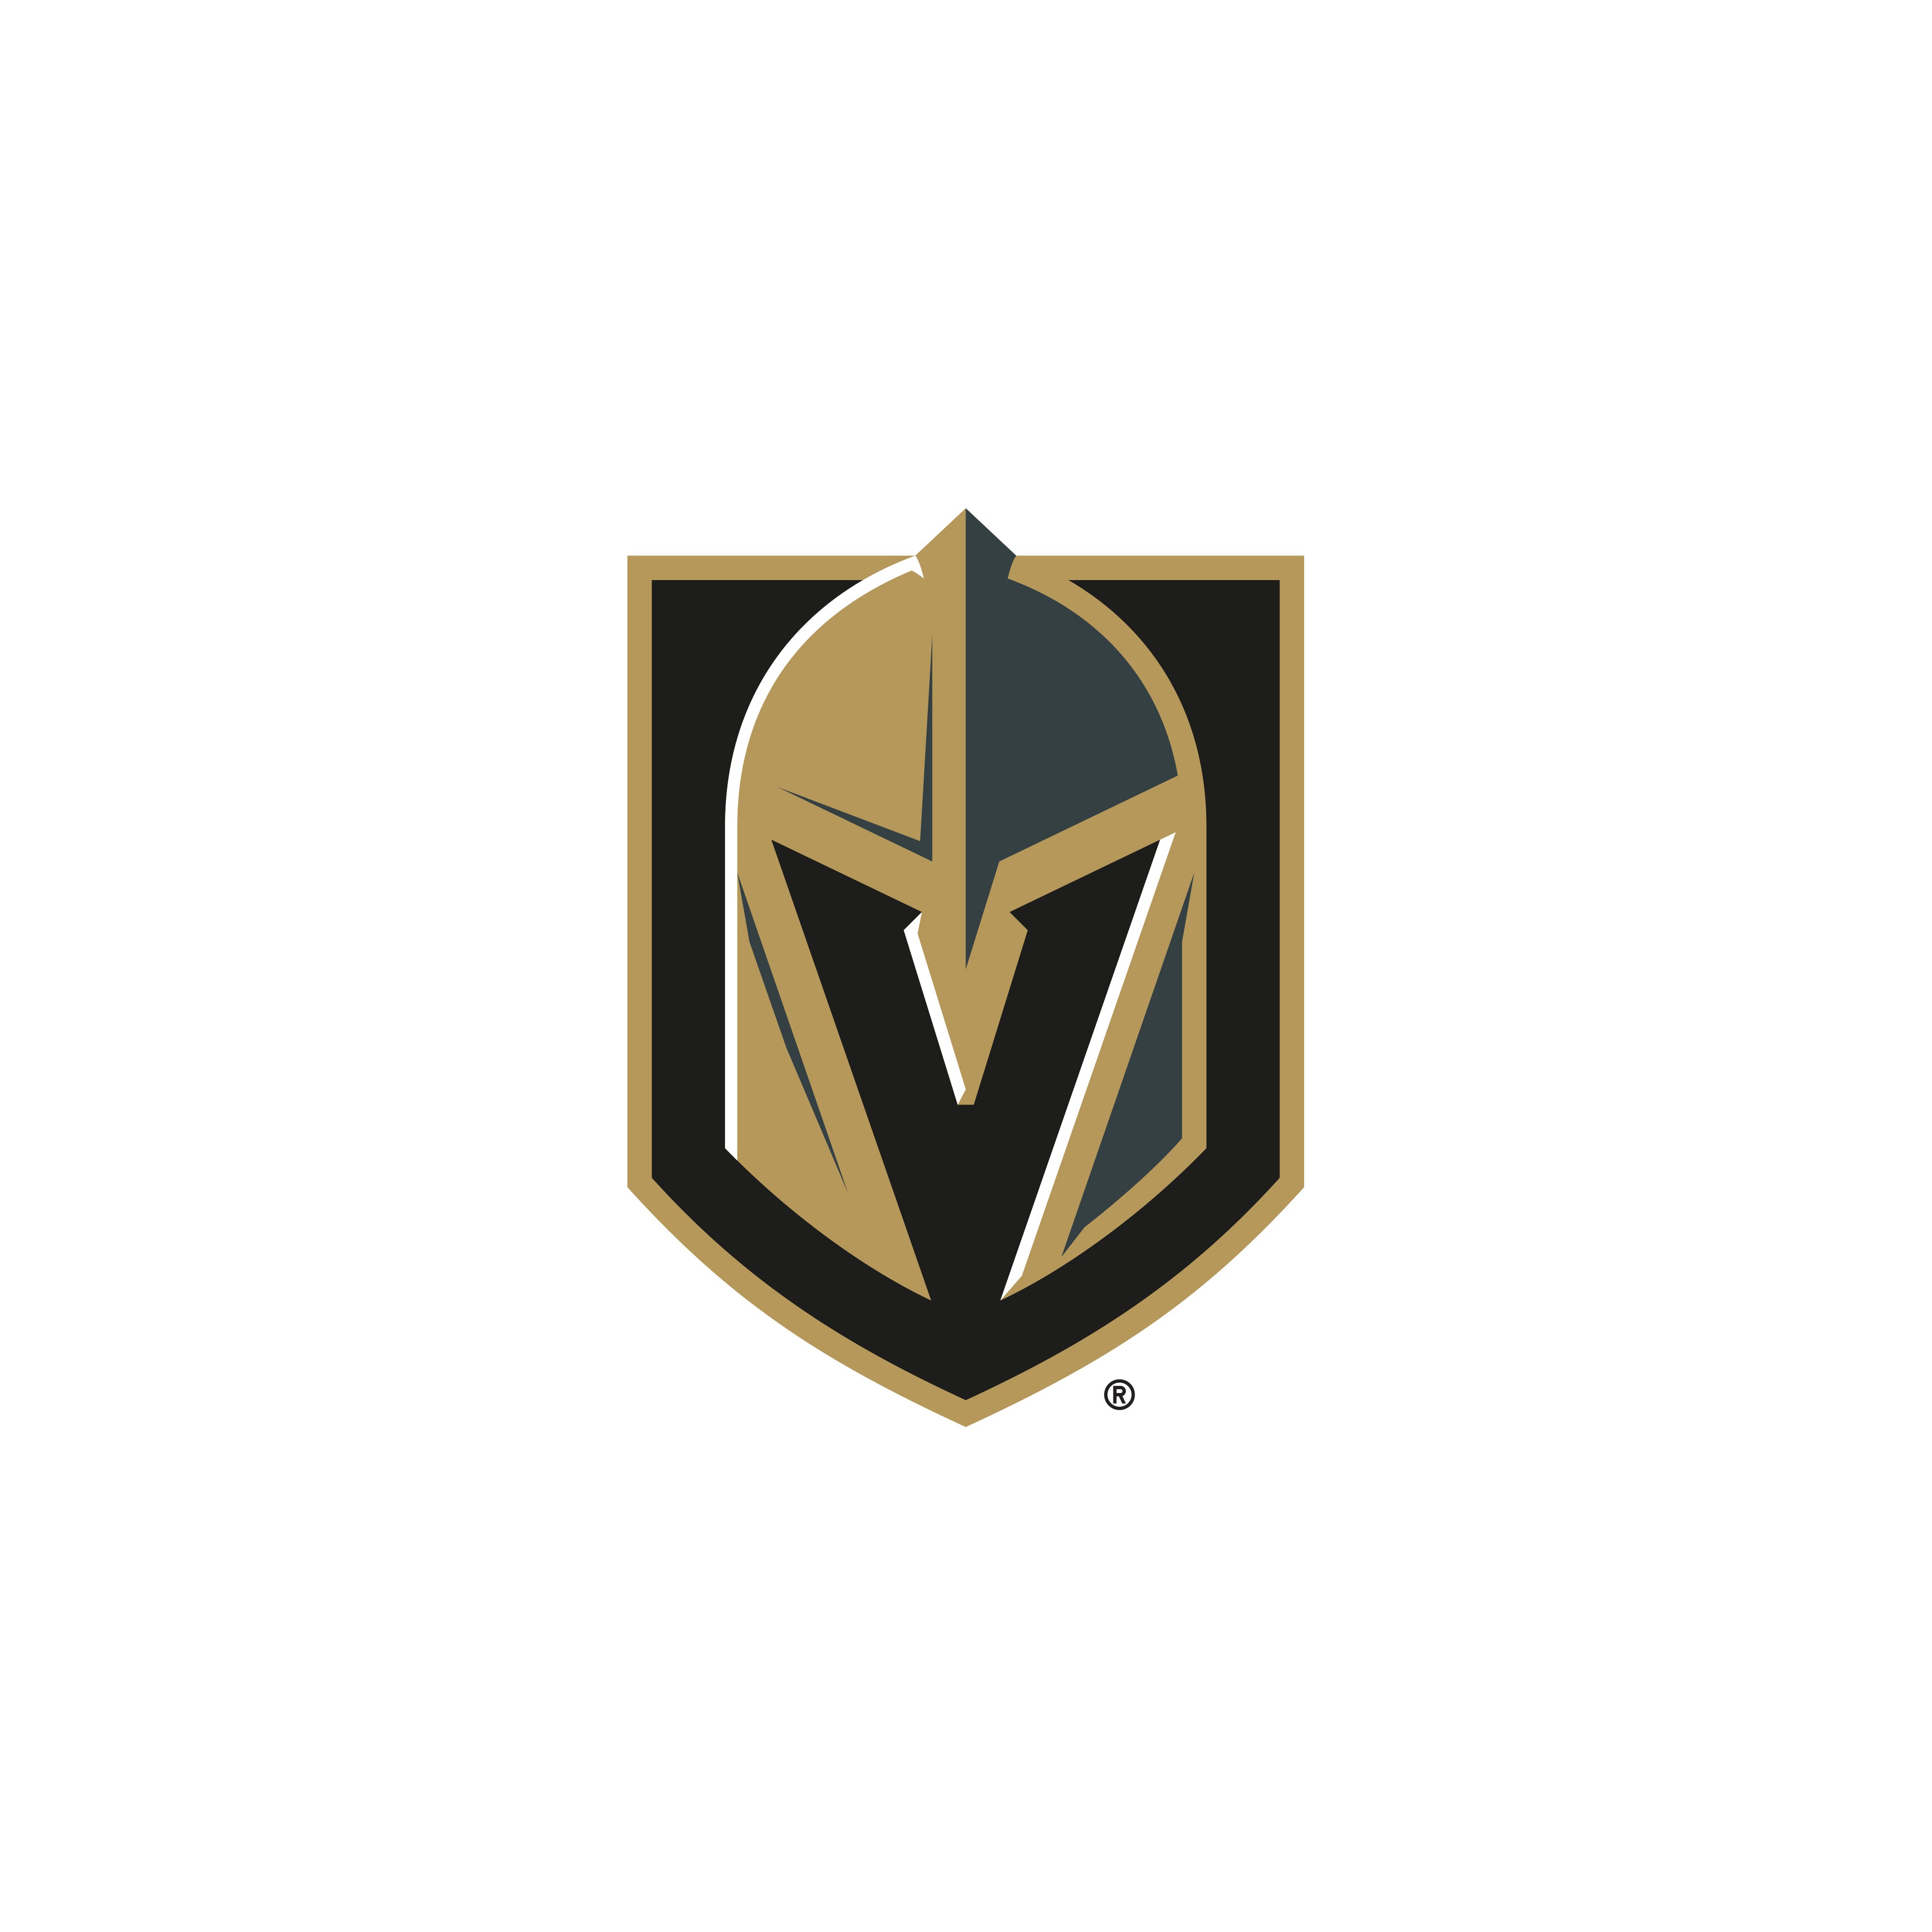 Instudio, A new take on the Vegas Golden Knights logo